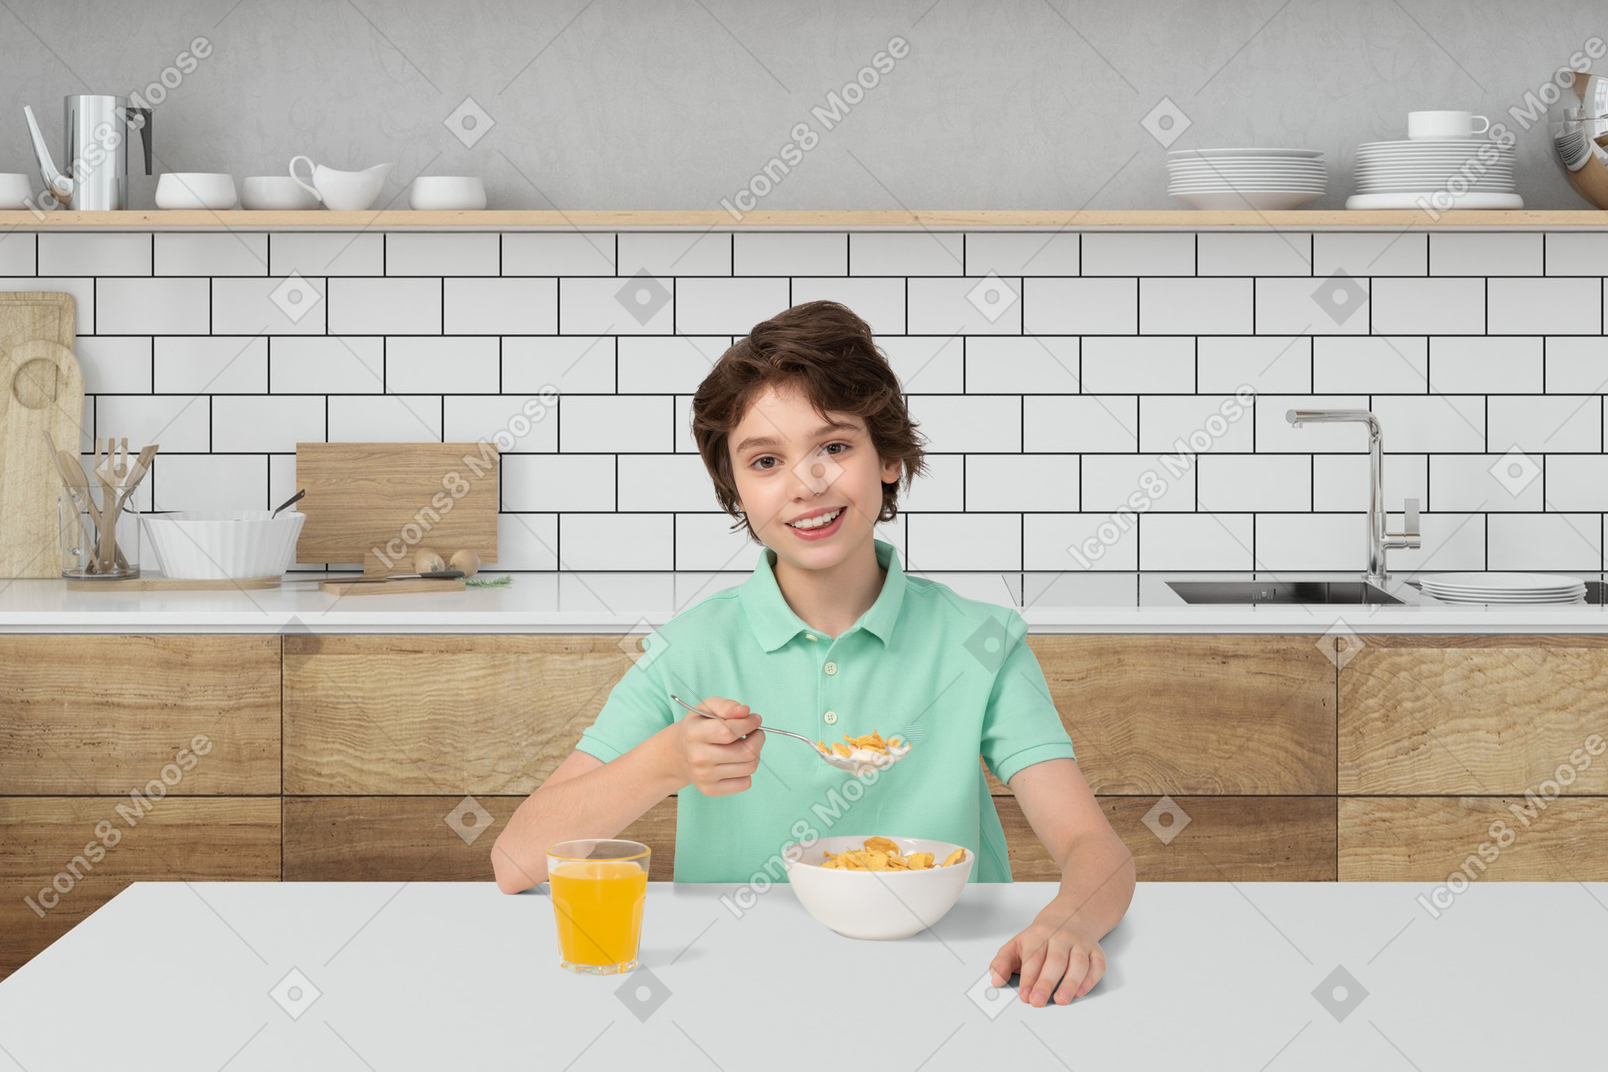 A man sitting at a table in the kitchen